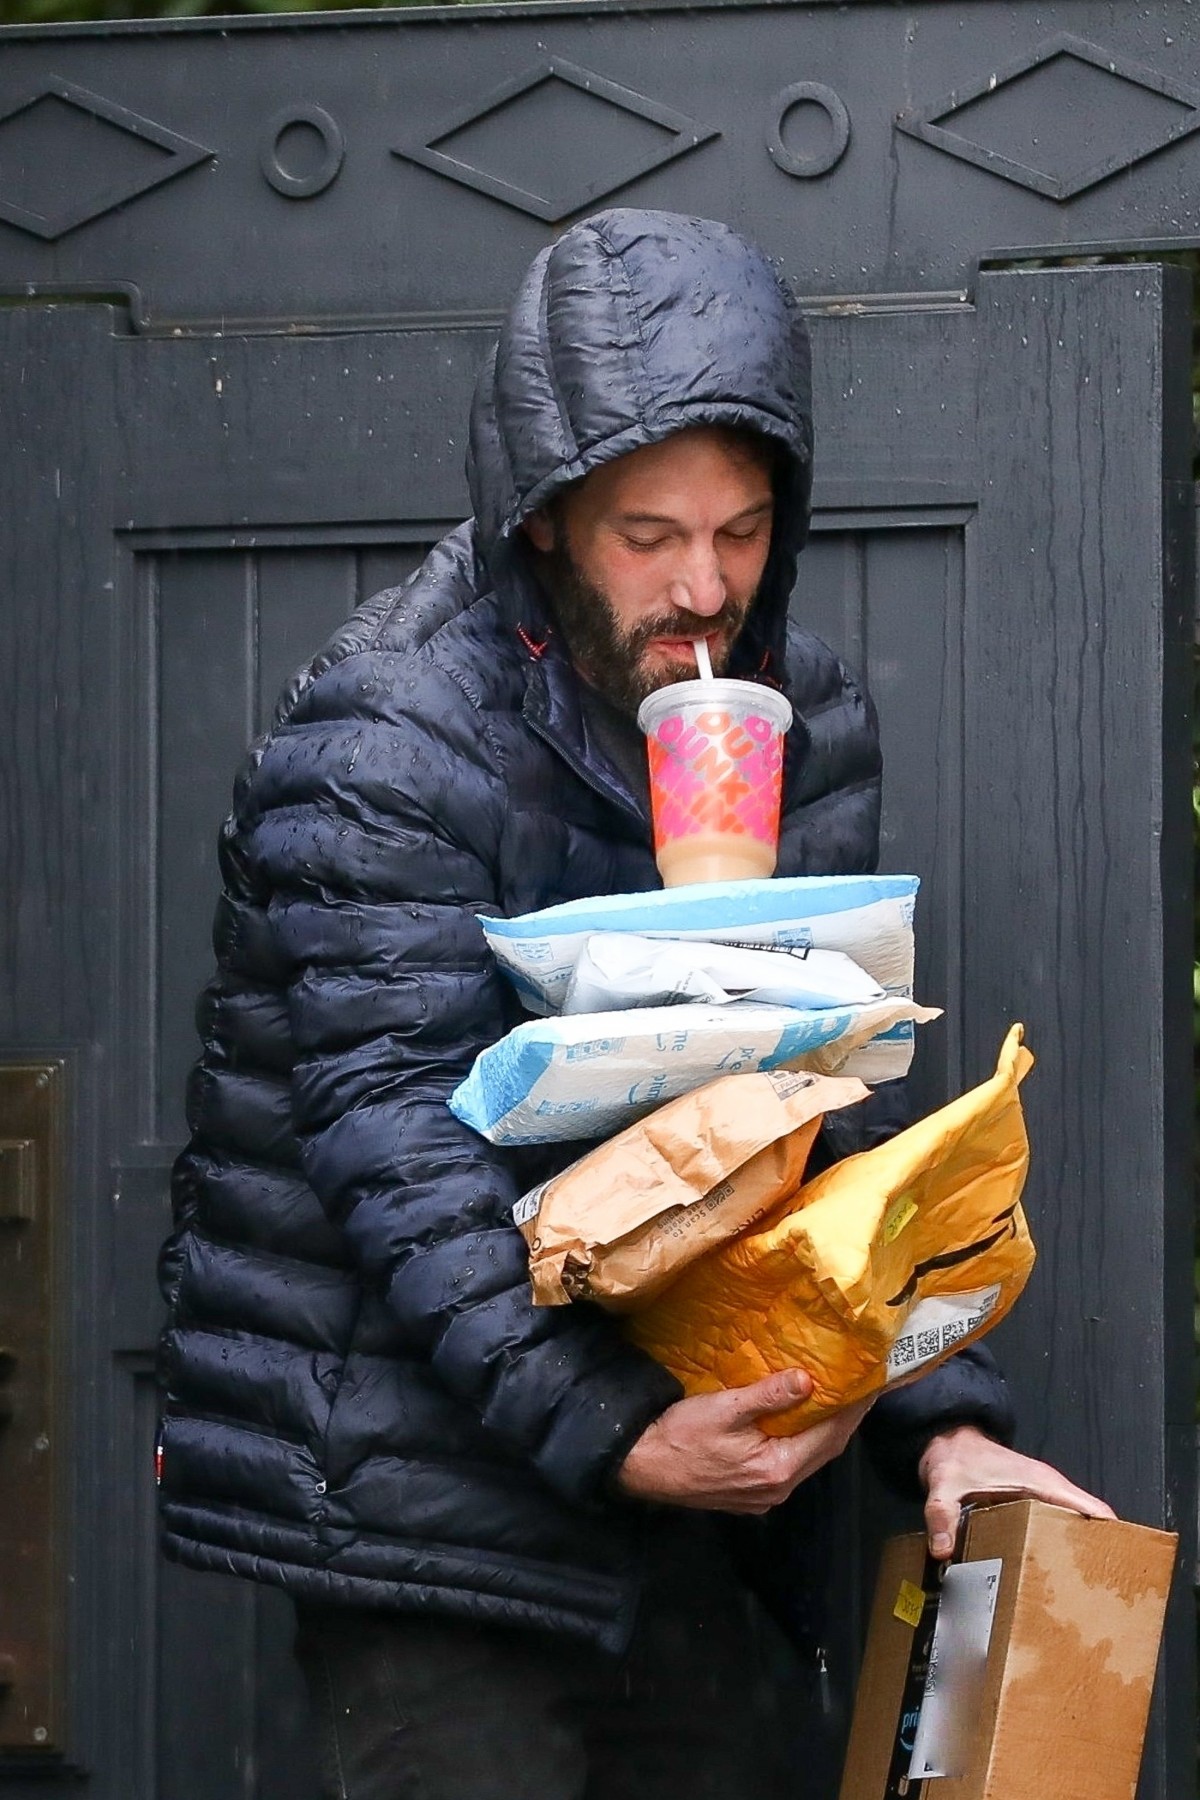 Ben Affleck grabs packages that were delivered to his house while sipping his coffee